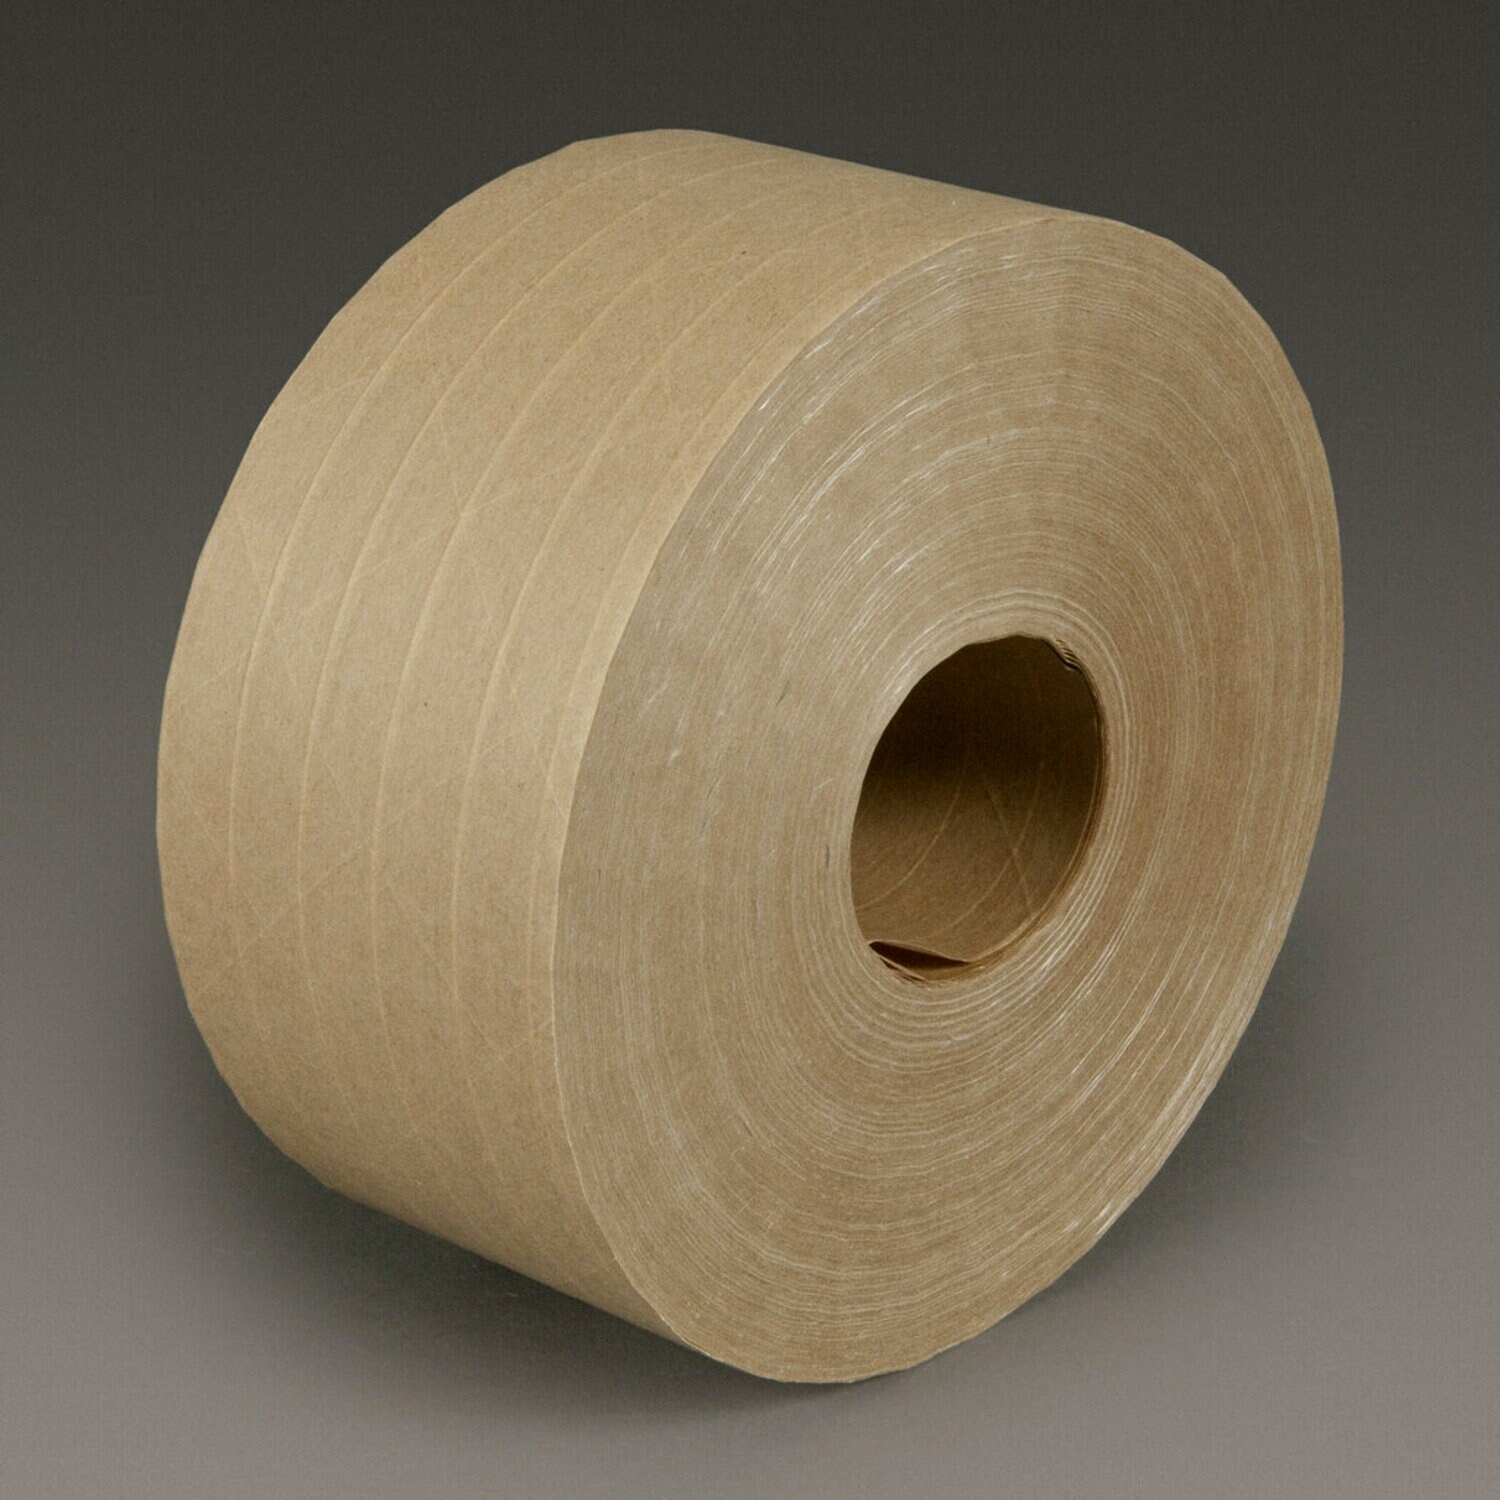 7010313035 - 3M Water Activated Paper Tape 6146, Natural, Medium Duty Reinforced, 72
mm x 450 ft, 10/Case